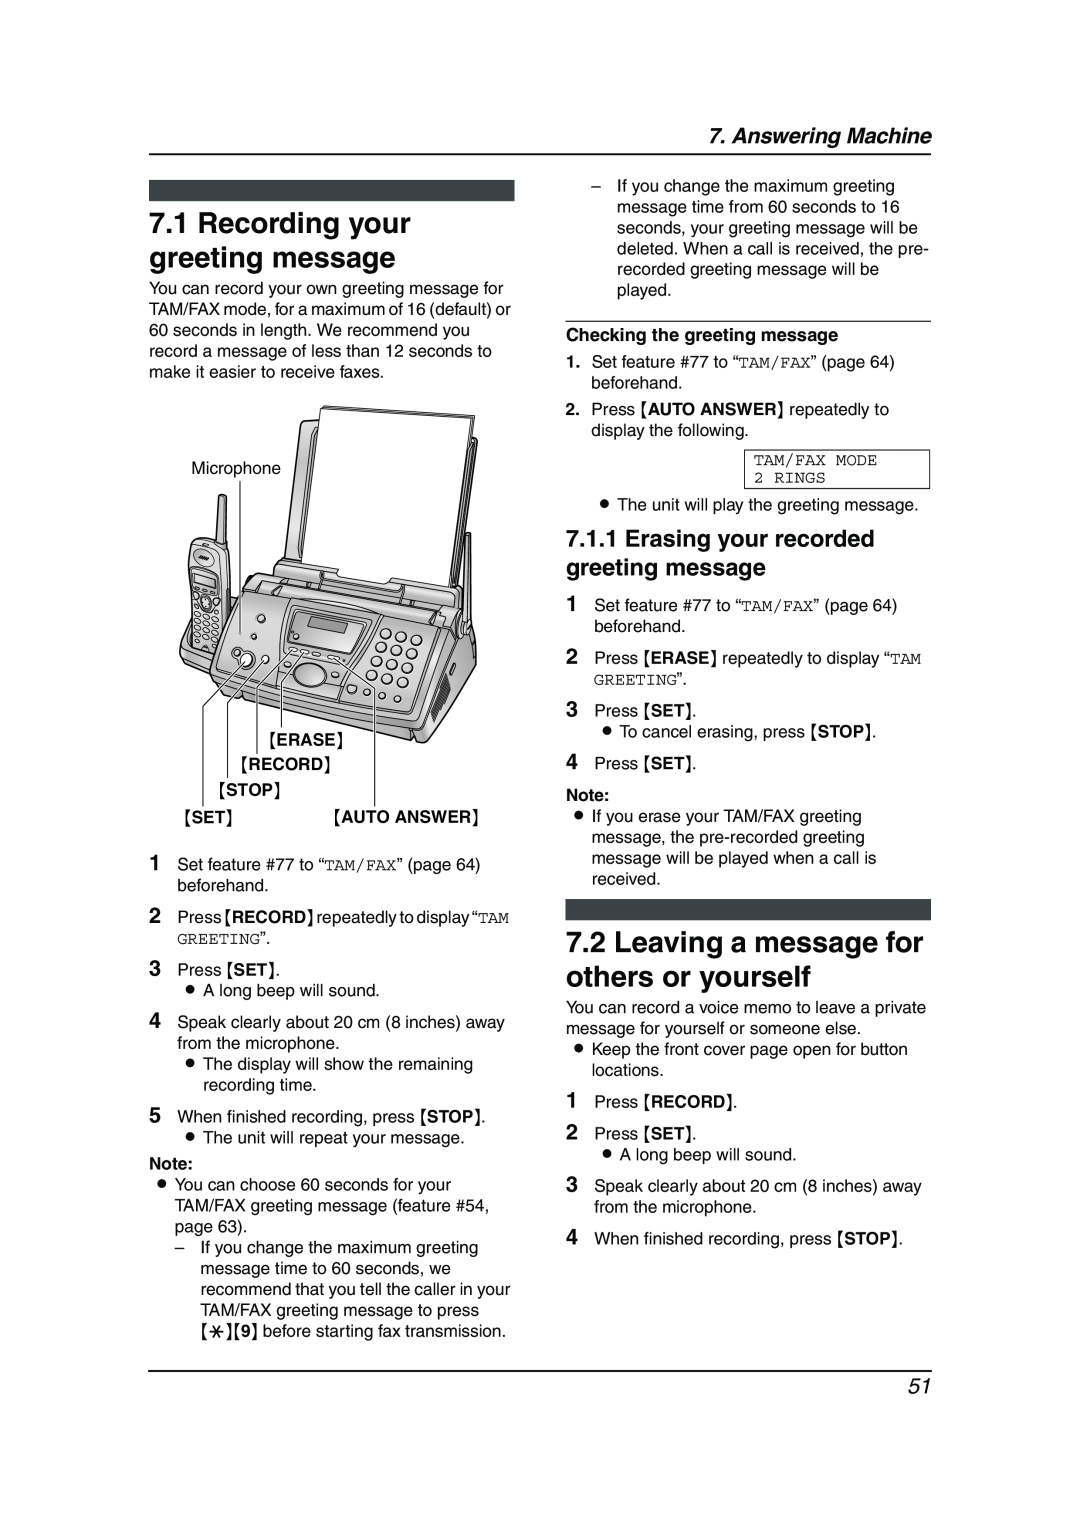 Panasonic KX-FPG377 manual Recording your greeting message, Leaving a message for others or yourself, Answering Machine 